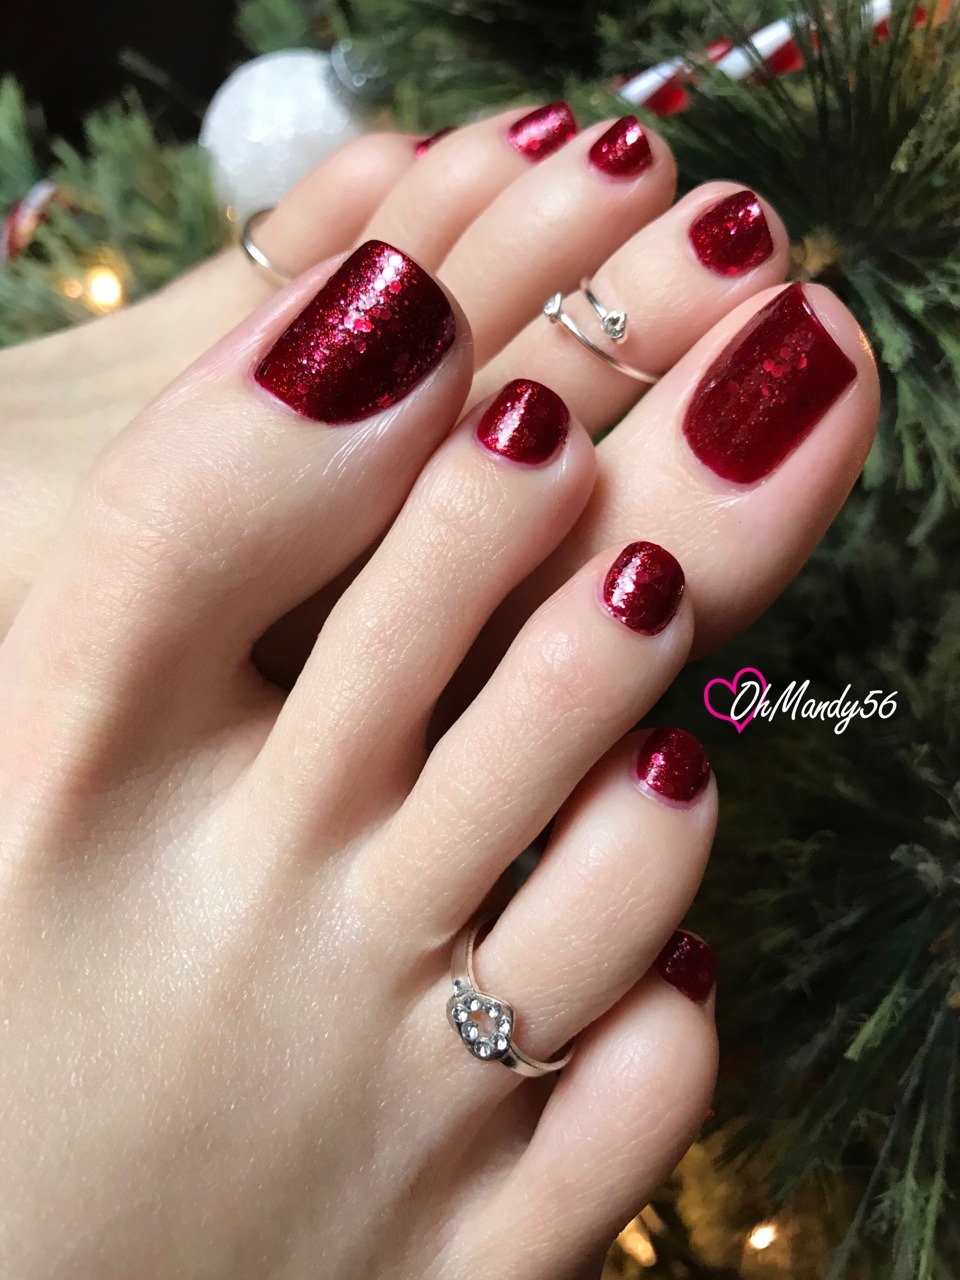 Ohmandy56 Sparkly Red Toes For Christmas Fee